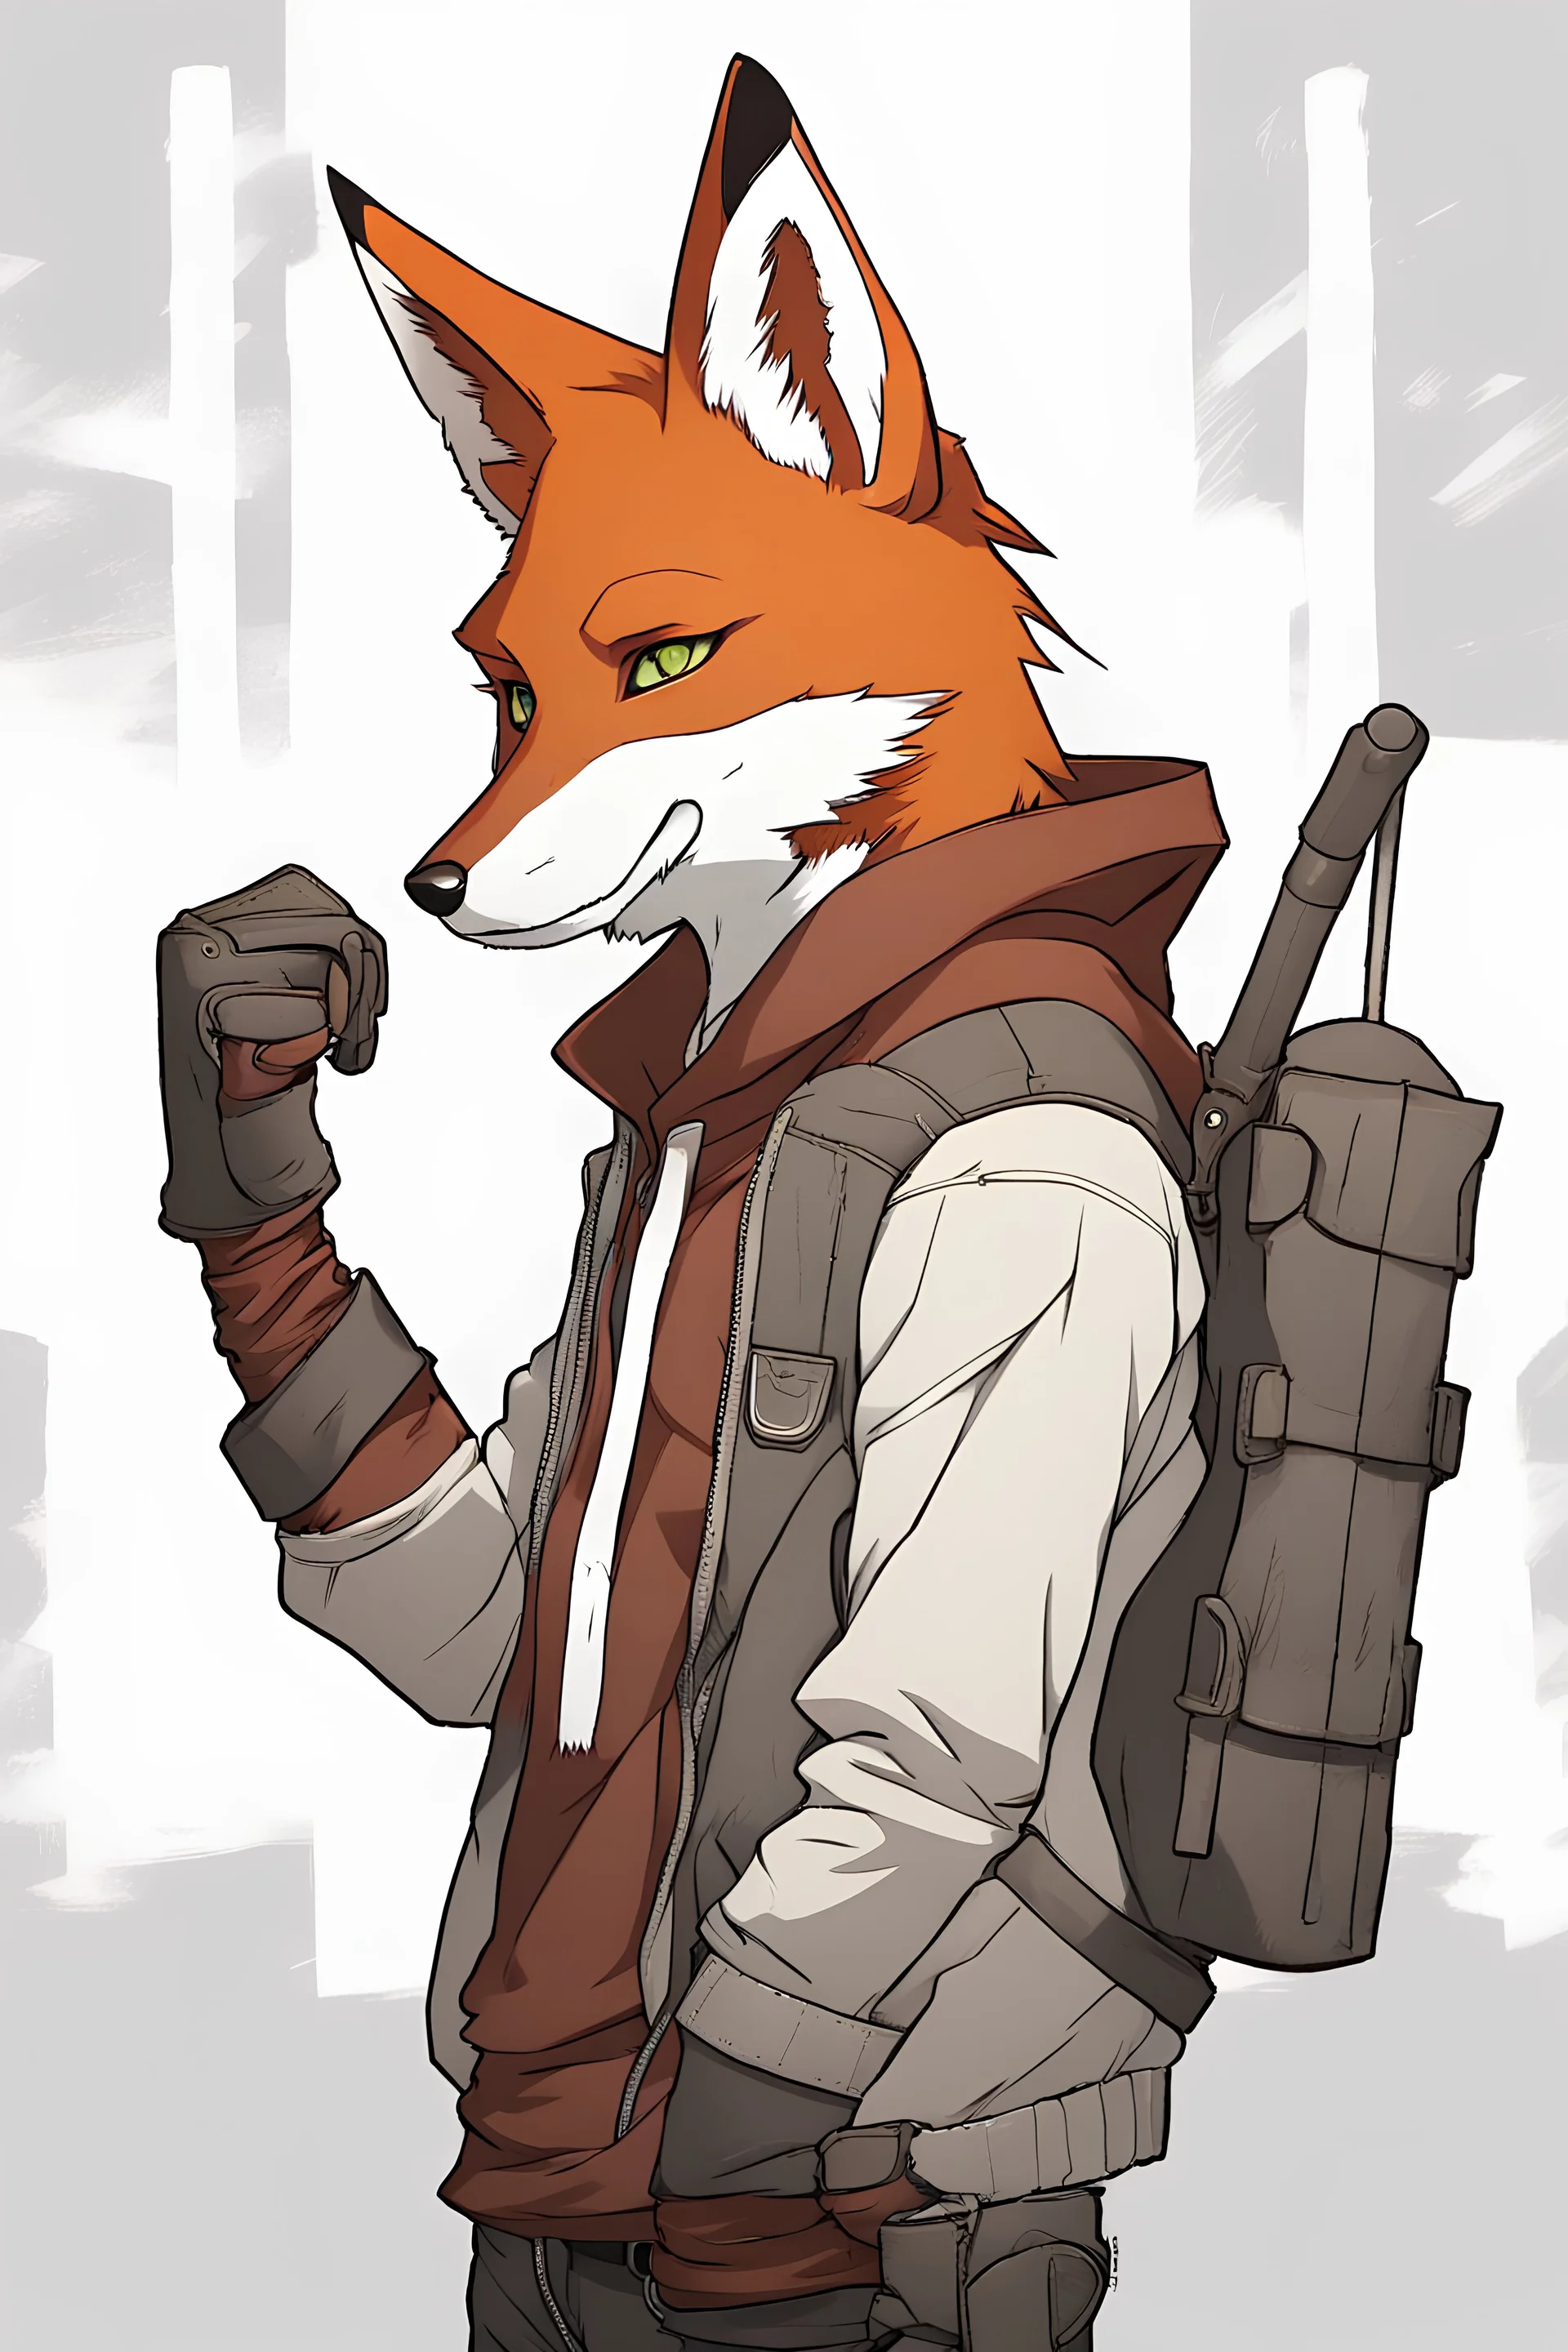 Create an attractive anime drawing of a humanoid fox character embodying the features of a male fox. This character exudes an air of strength and resilience, dressed in a hoodie and leather gloves that showcase their warrior nature. The hoodie can bear symbolic markings or emblems representing the character's journey and personal history. In a dramatic shot, the character is depicted in a state of deep sadness and seriousness. Their eyes reflect the weight of their experiences, hinting at the p